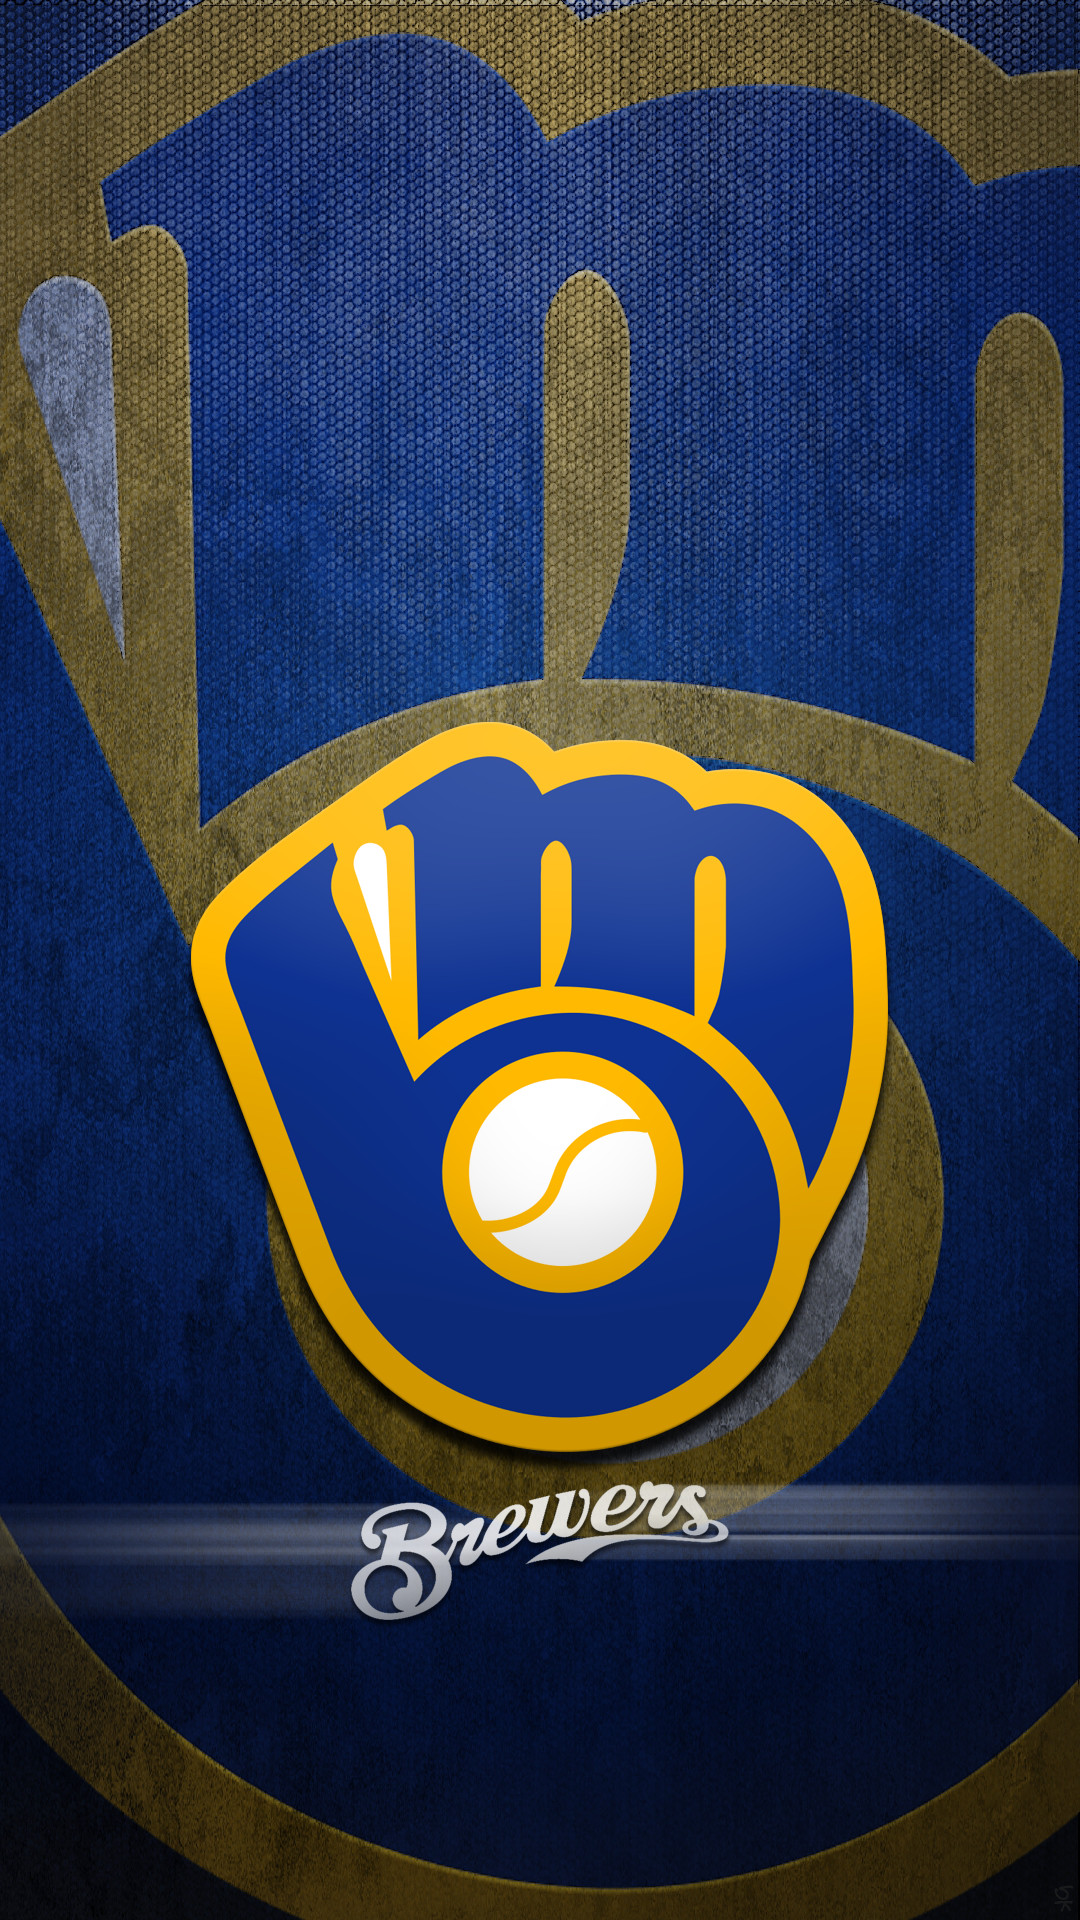 1080x1920 Brewers High Quality Wallpapers Gallery, ECI.3993903